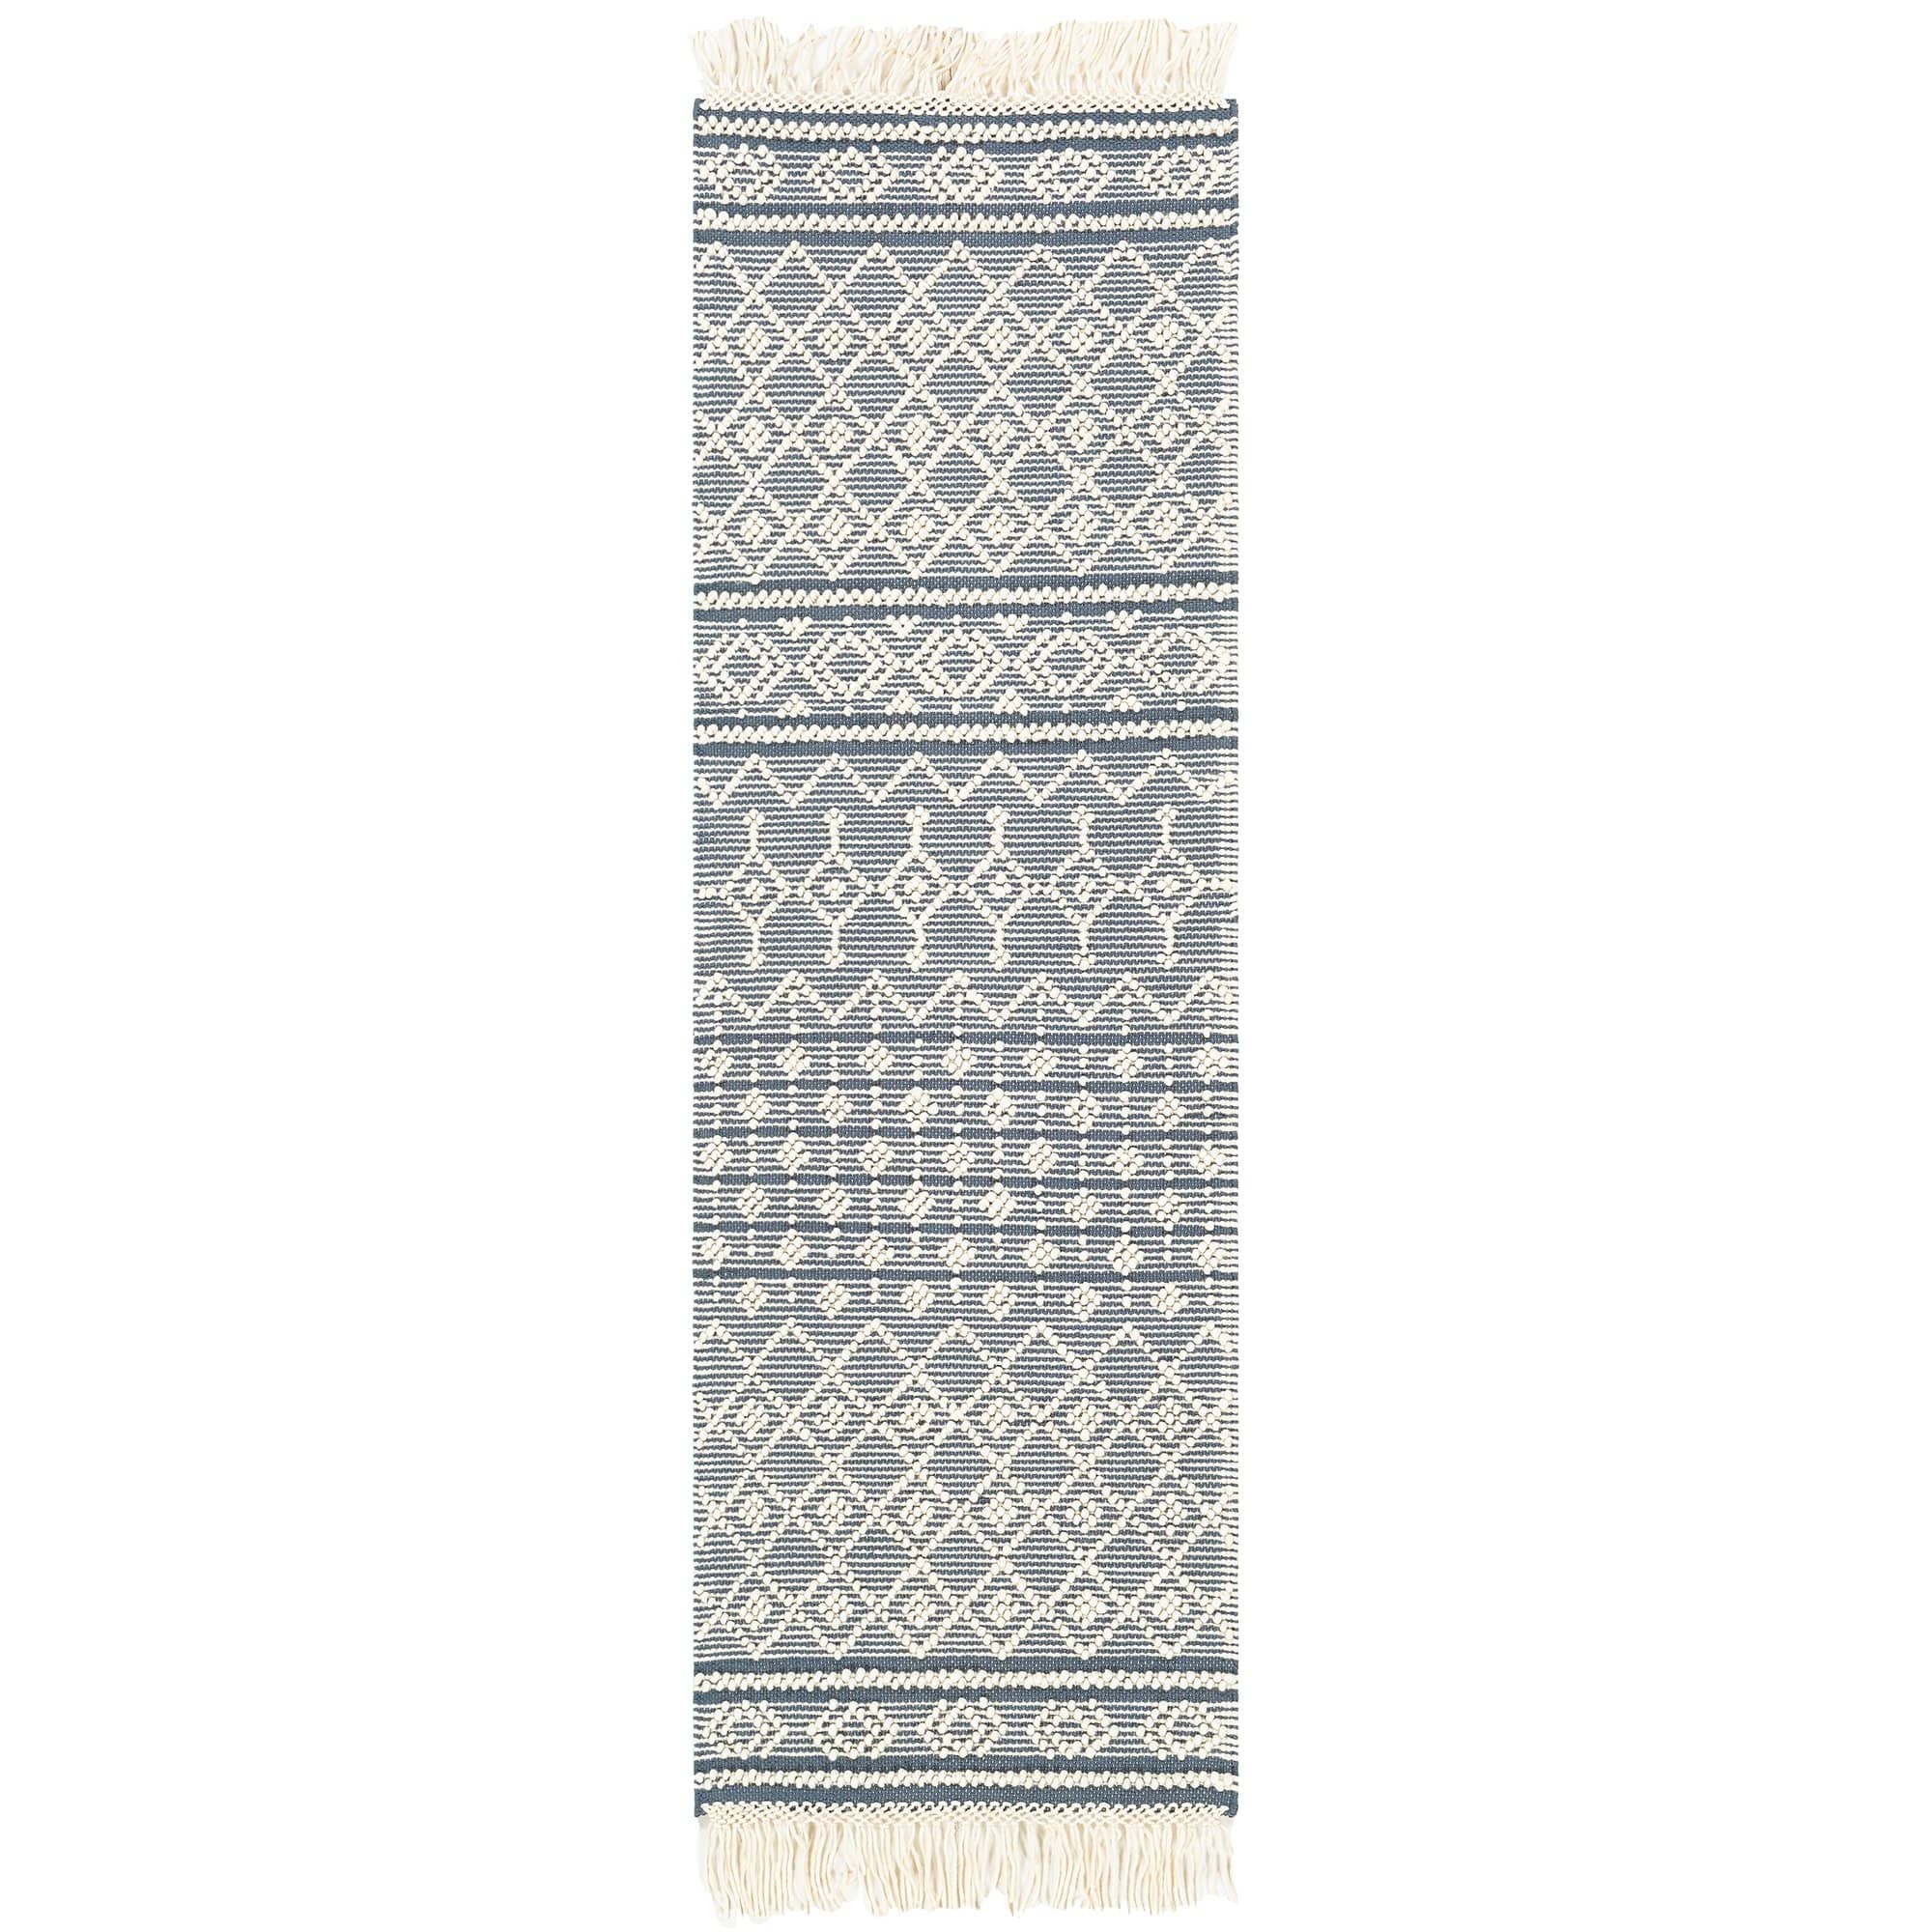 SAJAVAT HOME Pure Cotton Tufted Rectangular Floor Rug|3X5 Feet 36X60  Inches|Cream & Daisy White Hand Knittedall Season Use(Pack Of 1)